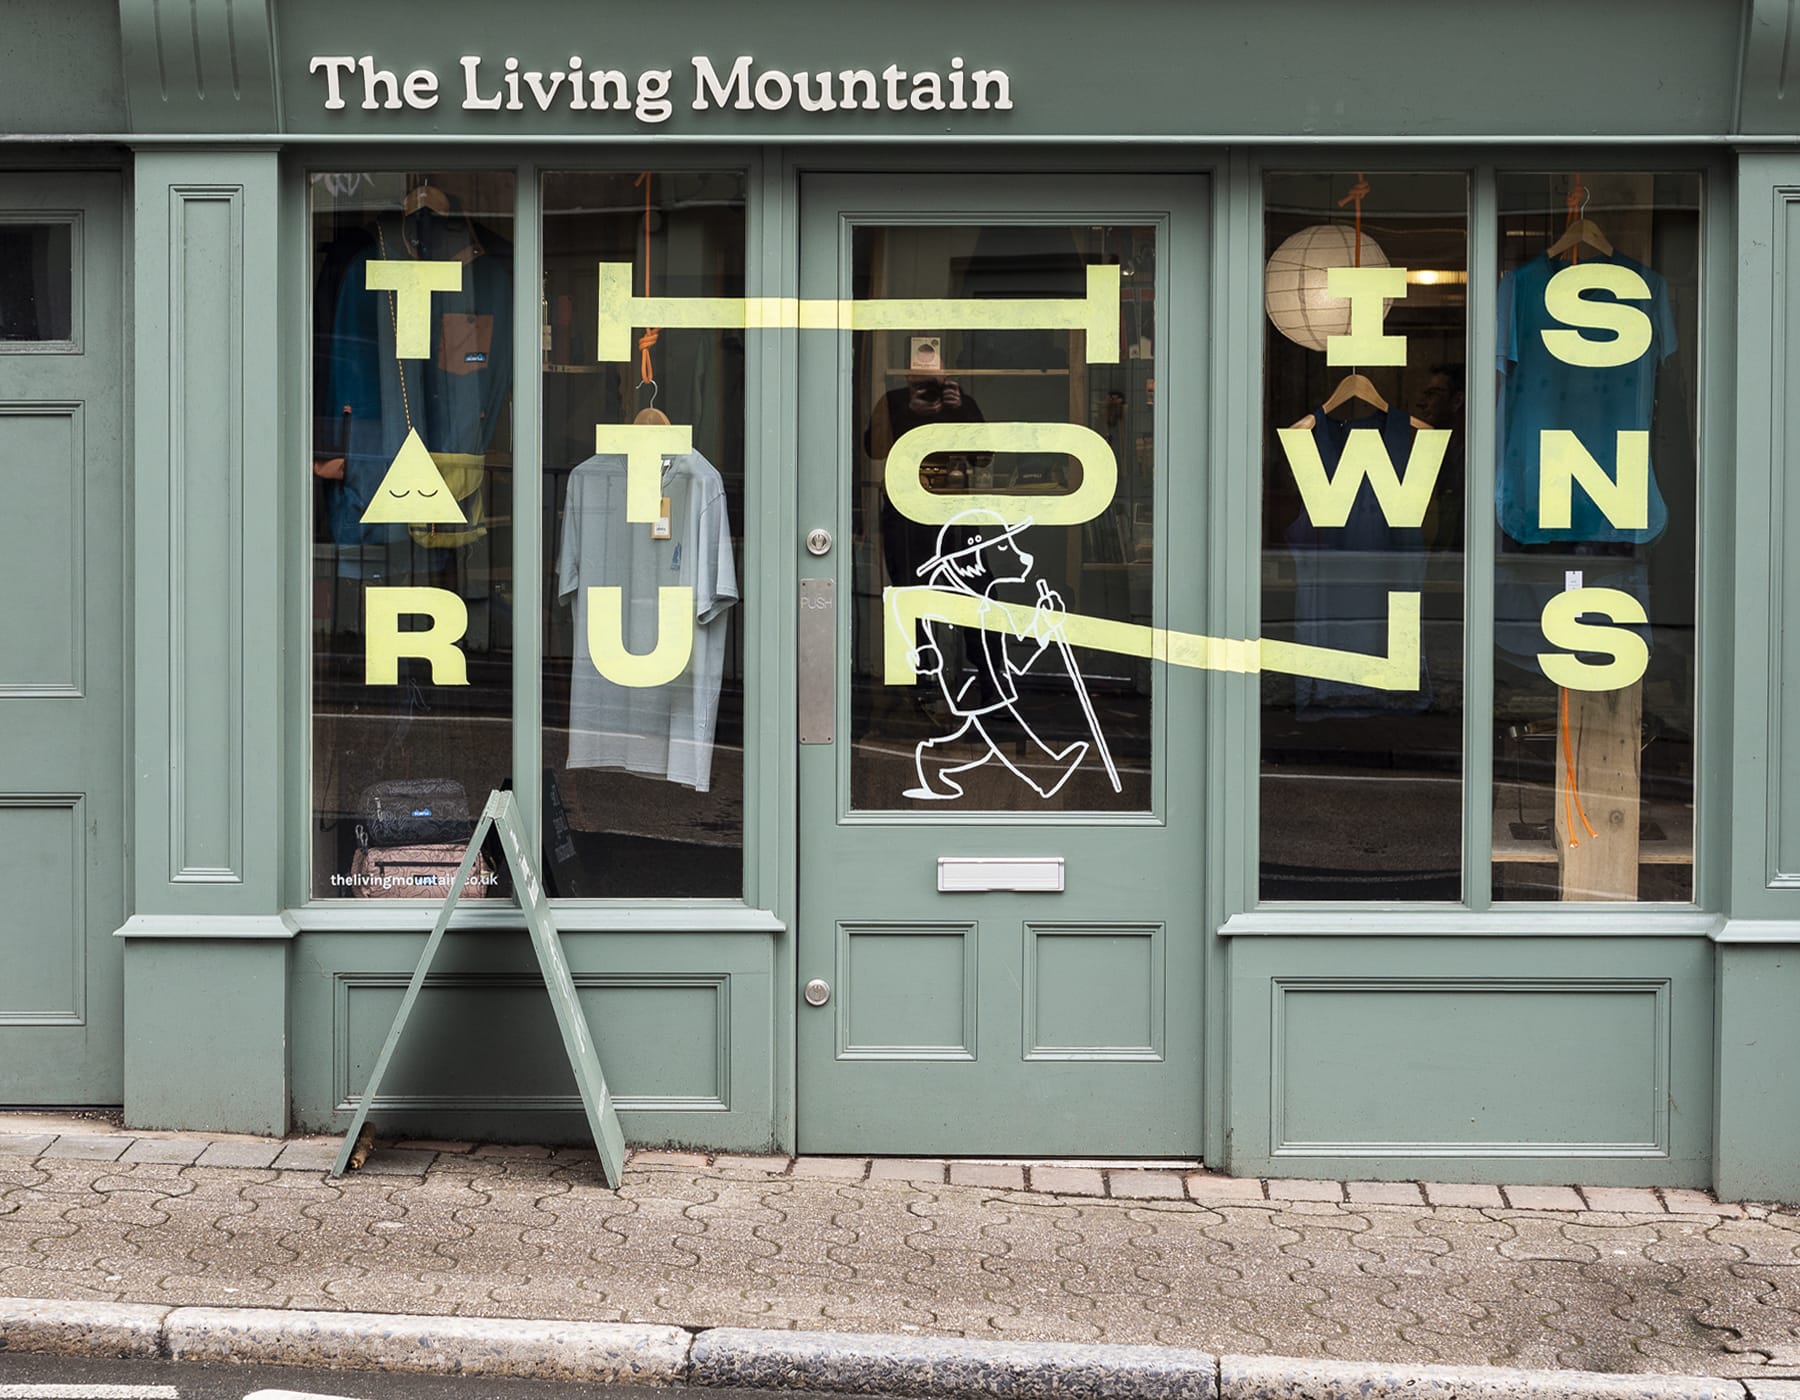 This Town Runs by Colour Format for The Living Mountain